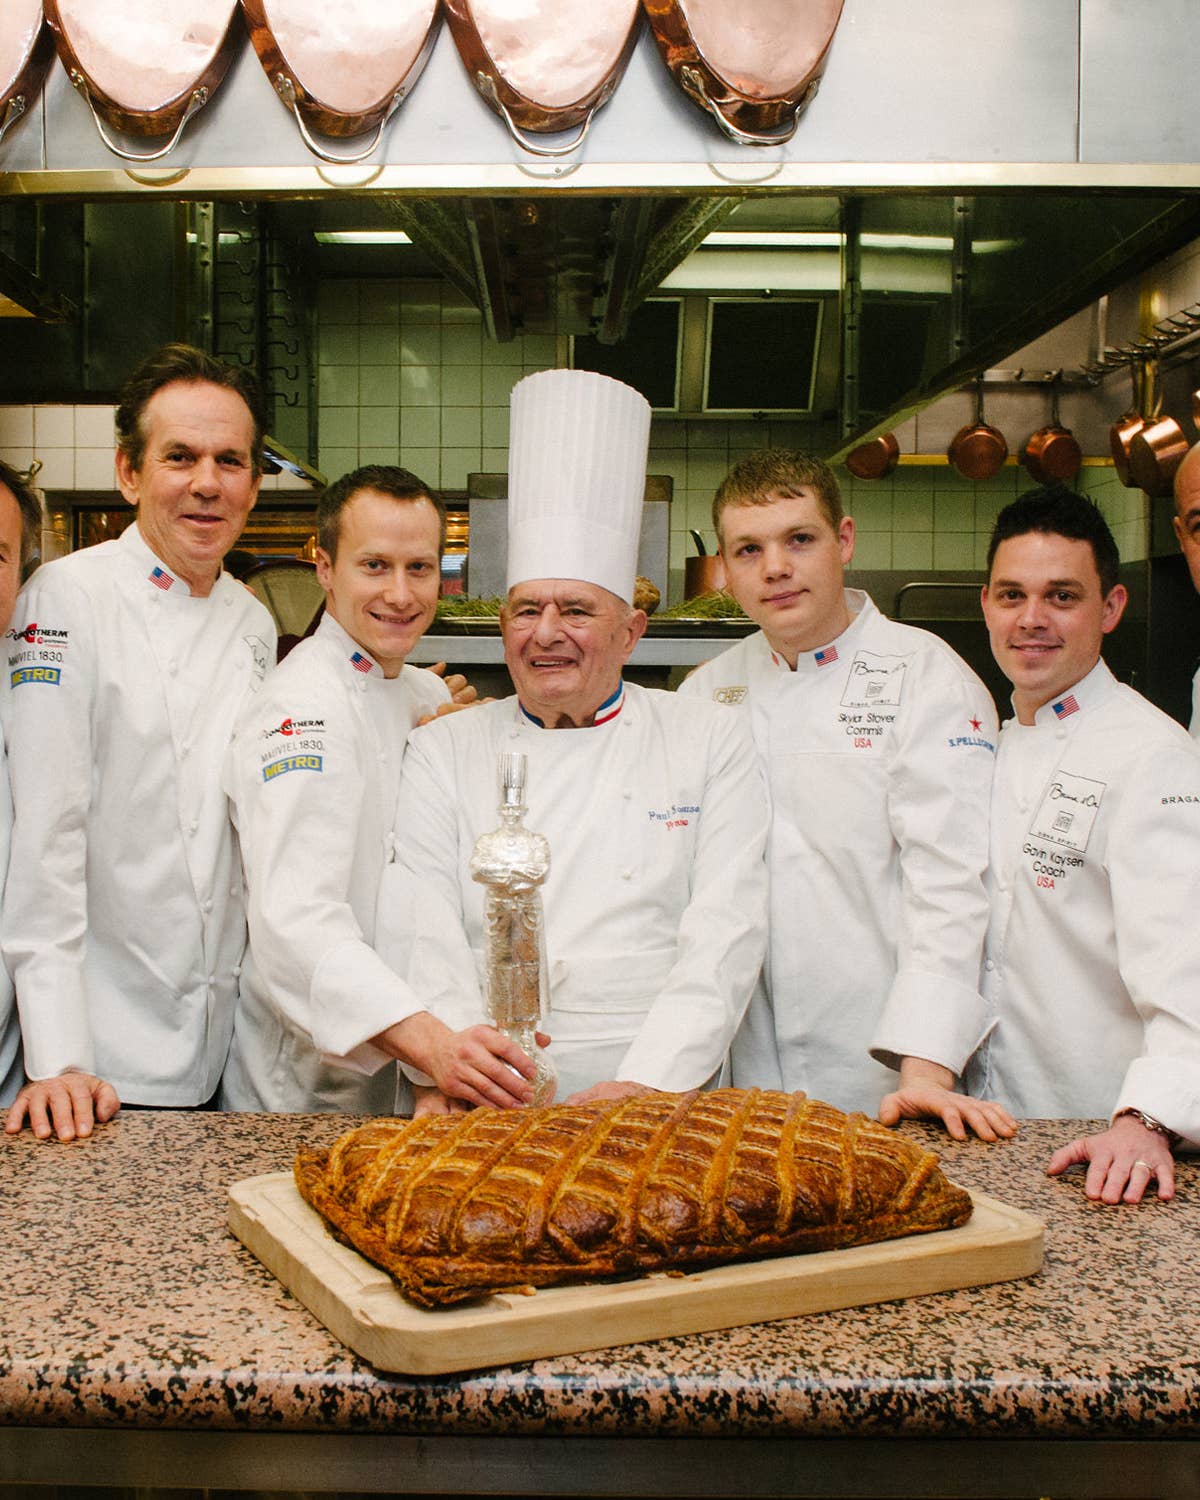 On the Hunt for the Next American Bocuse d’Or Chef